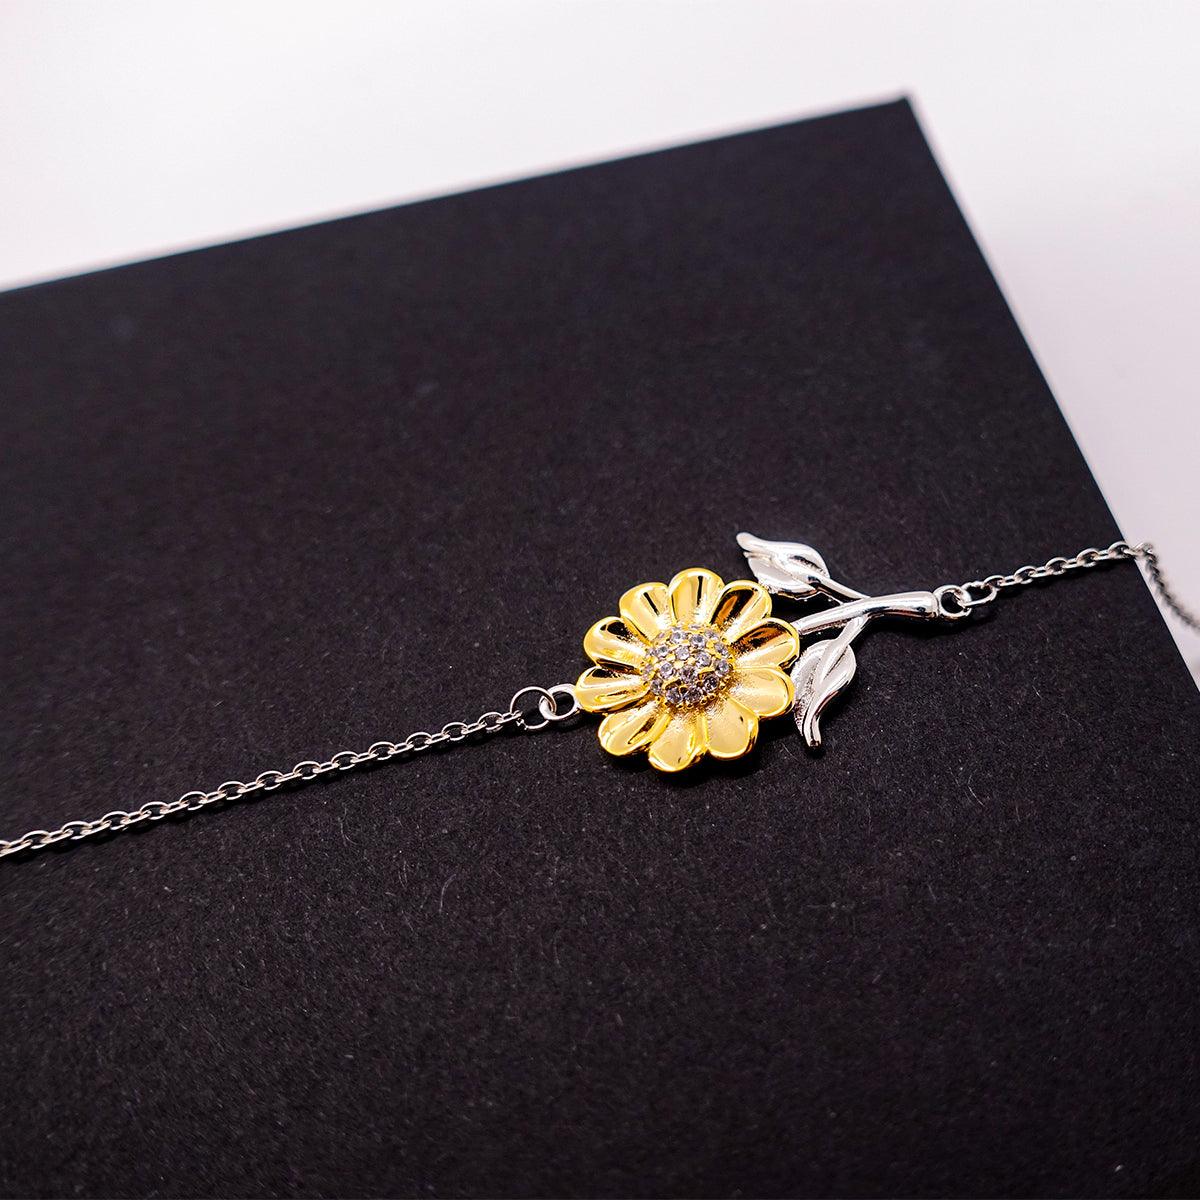 Sister Sunflower Bracelet Gifts, To My Sister You are braver than you believe, stronger than you seem, Inspirational Gifts For Sister Card, Birthday, Christmas Gifts For Sister Men Women